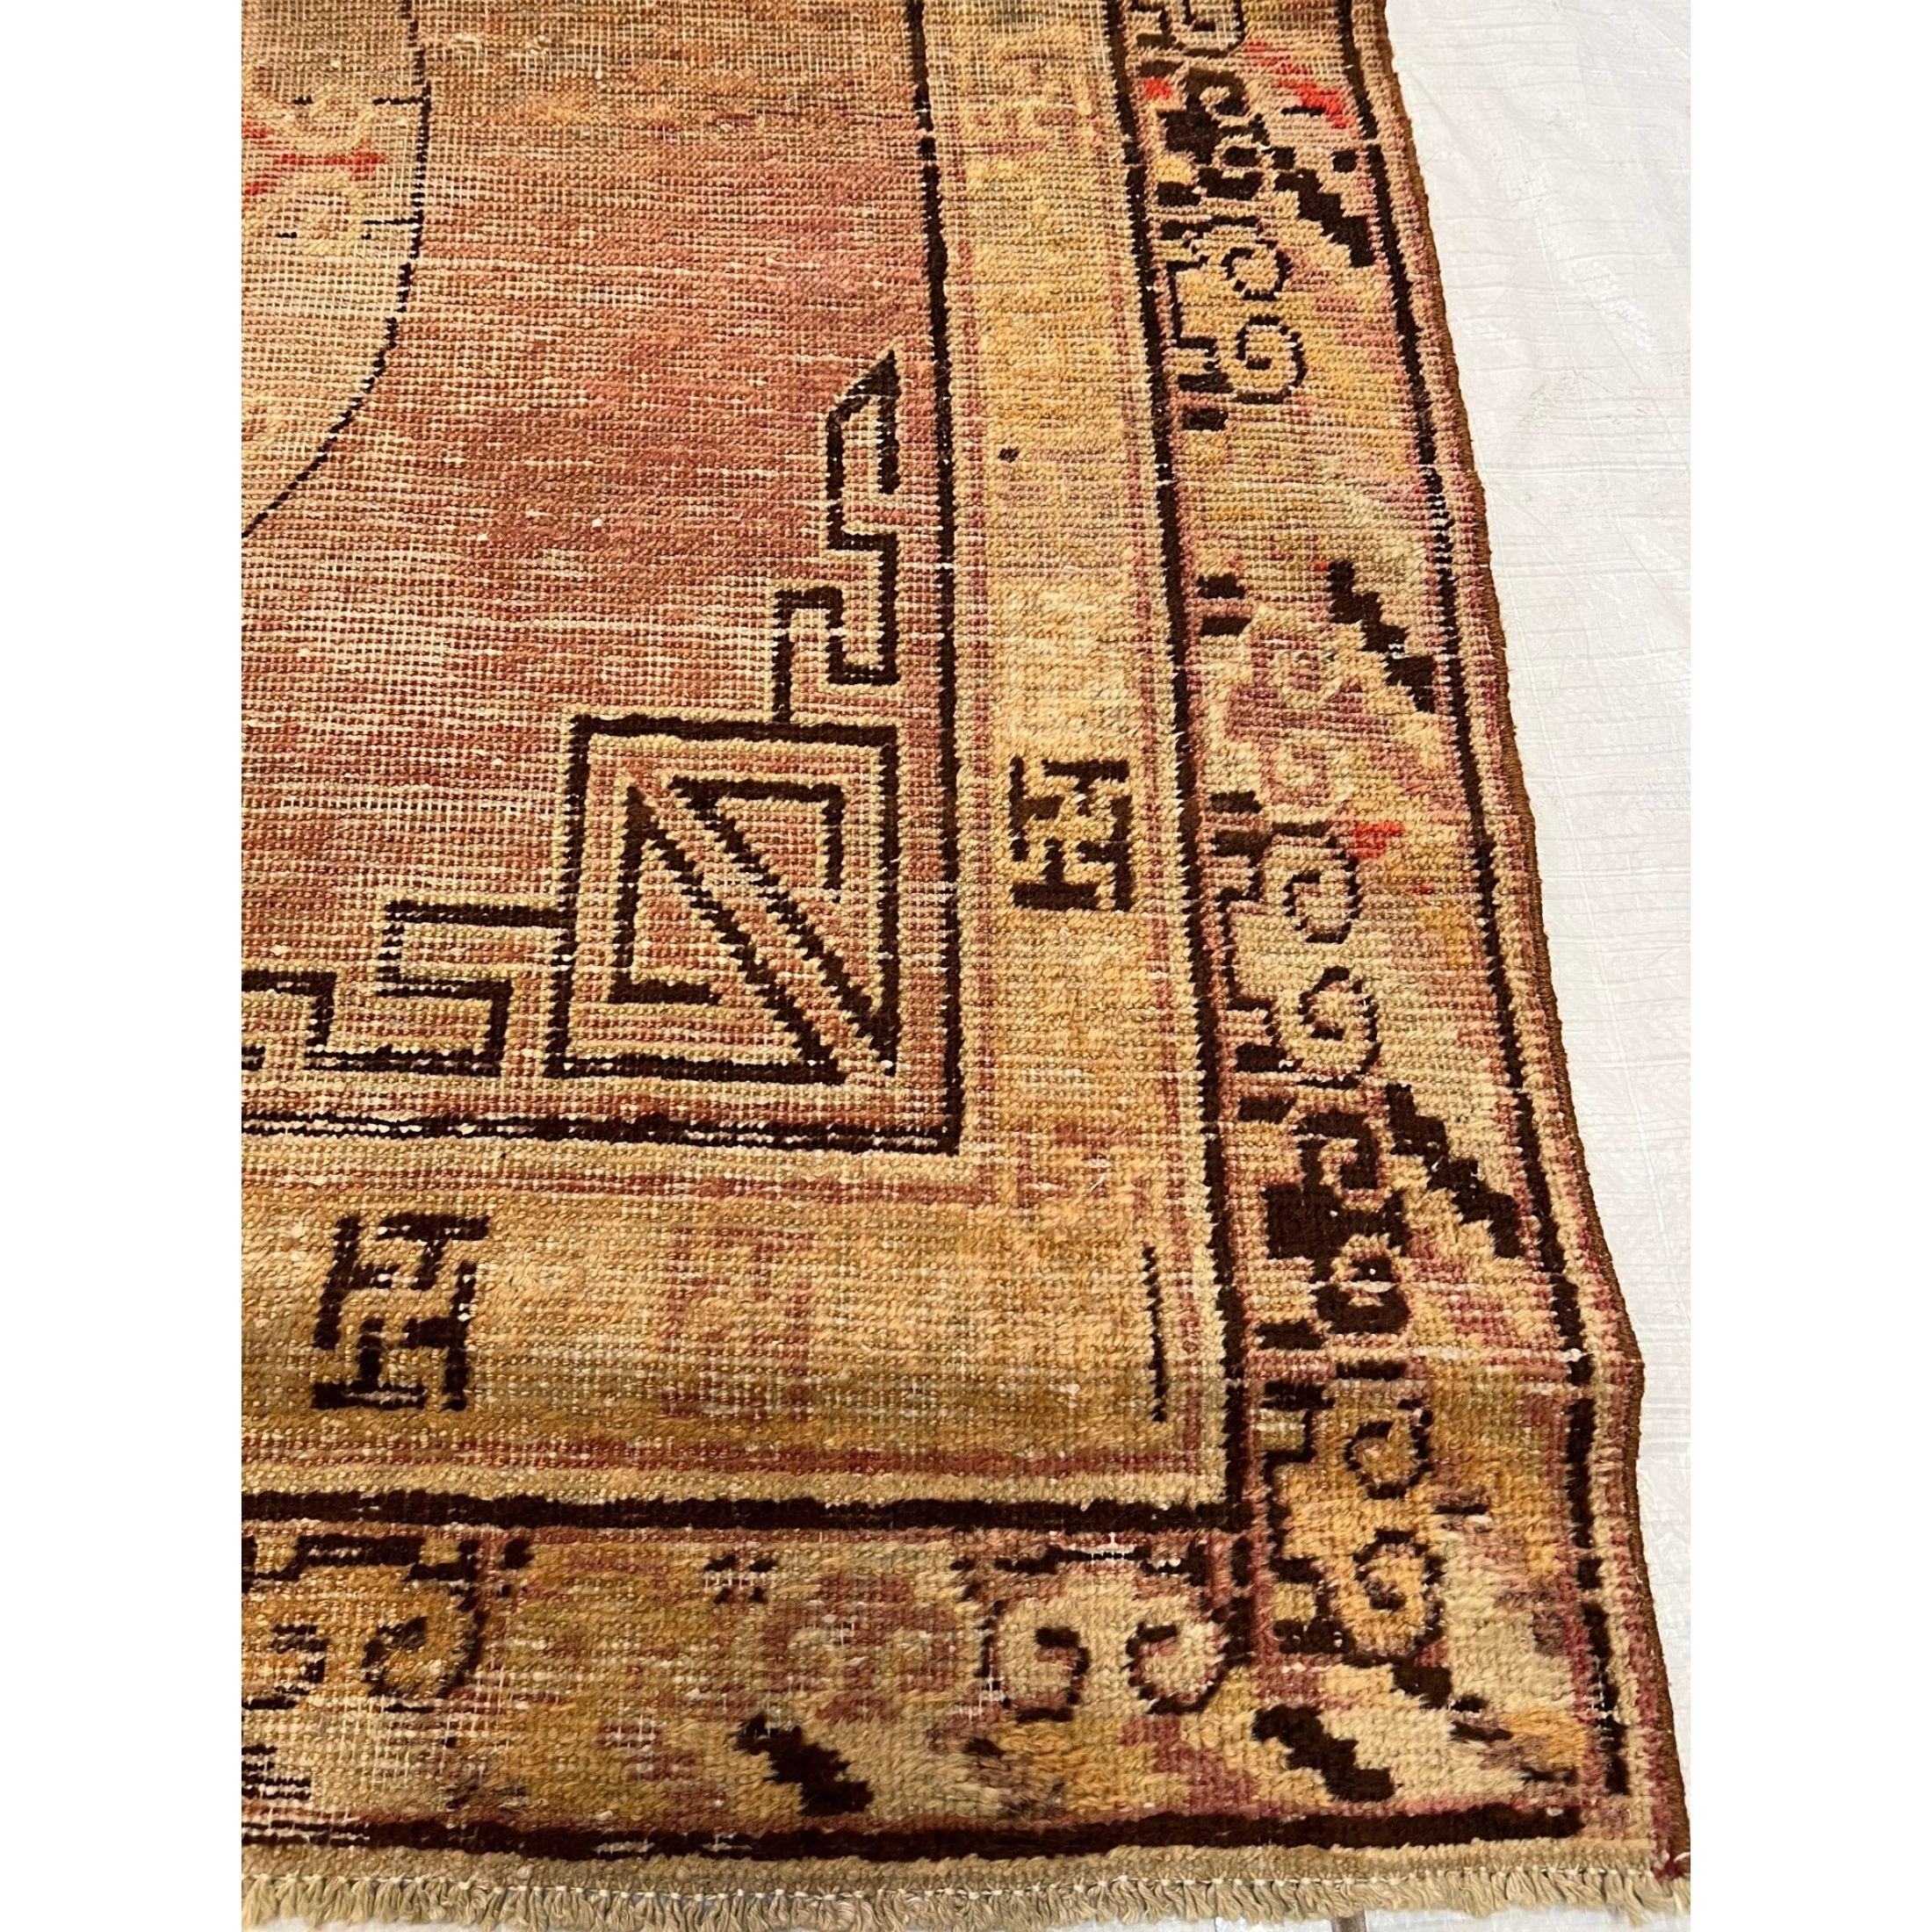 Antique 19th Century Samarkand Rug In Good Condition For Sale In Los Angeles, US